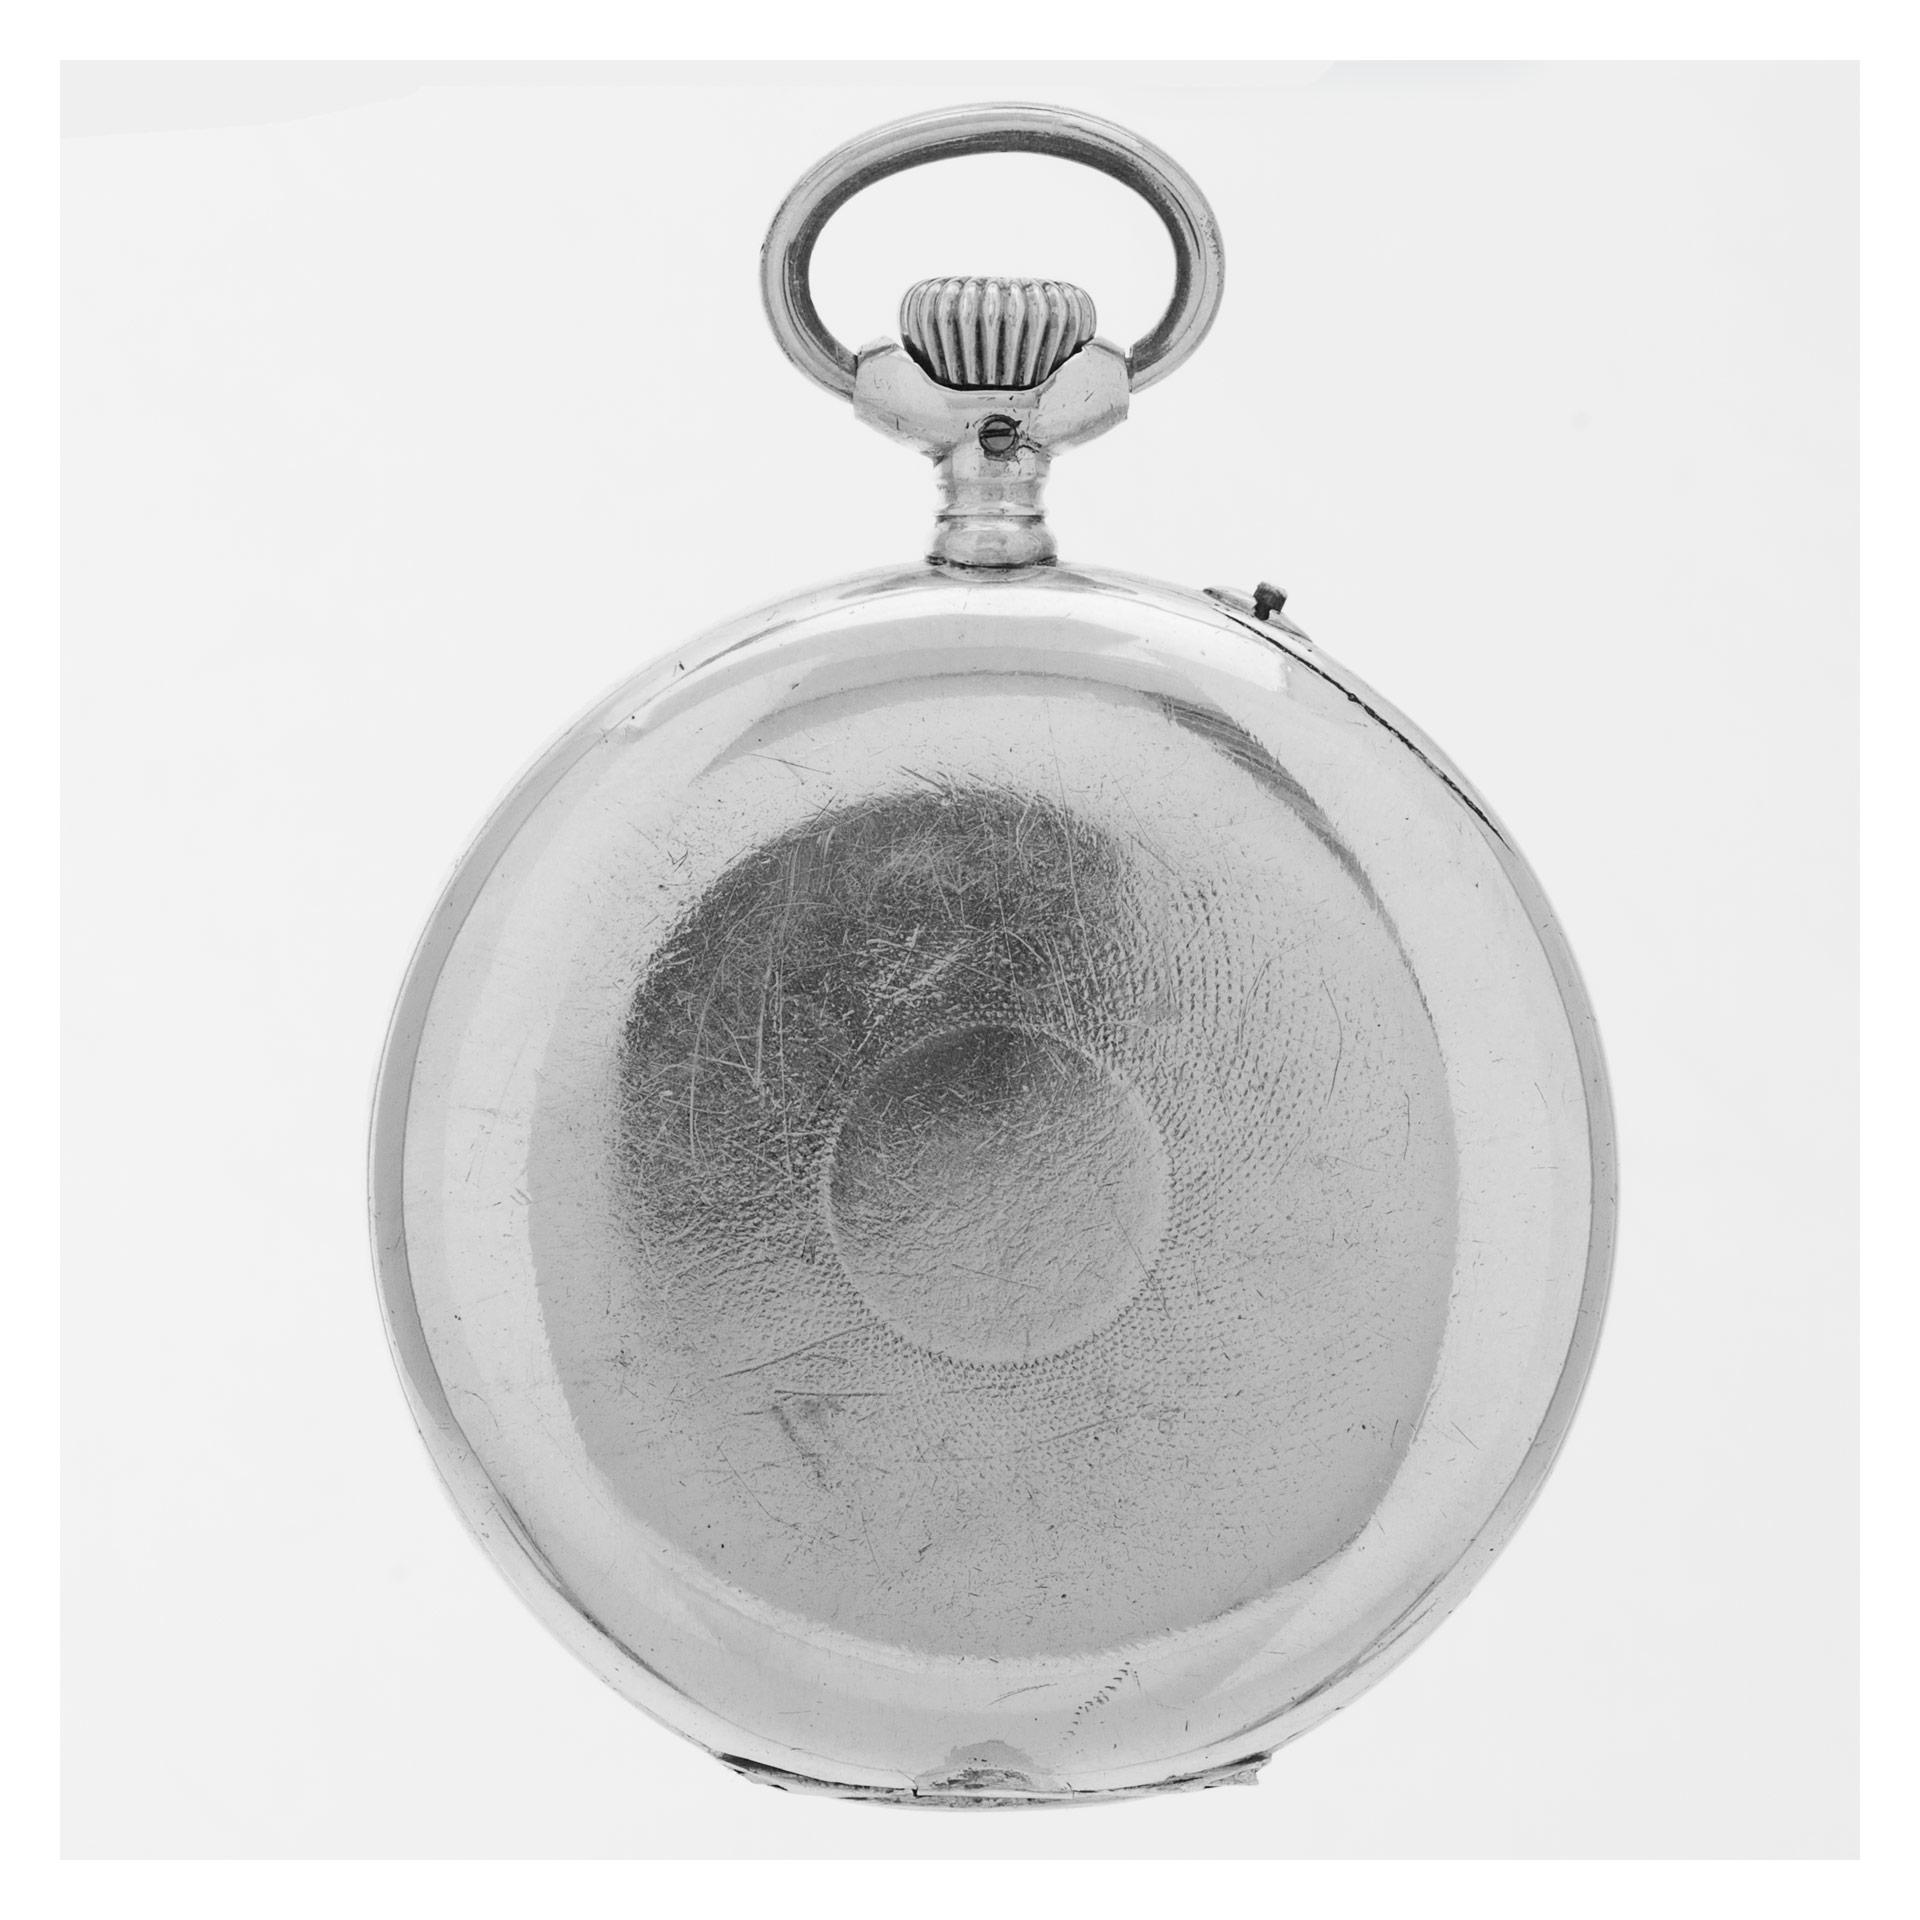 IWC open face pocket watch 15 jewels, white porcelain dial and heavy moon hands in silver.manual with sub-seconds. 53mm. Ref 761566. Circa 1890. Fine Pre-owned IWC Watch.

Certified preowned Vintage IWC pocket watch watch. This IWC watch has a 53 x